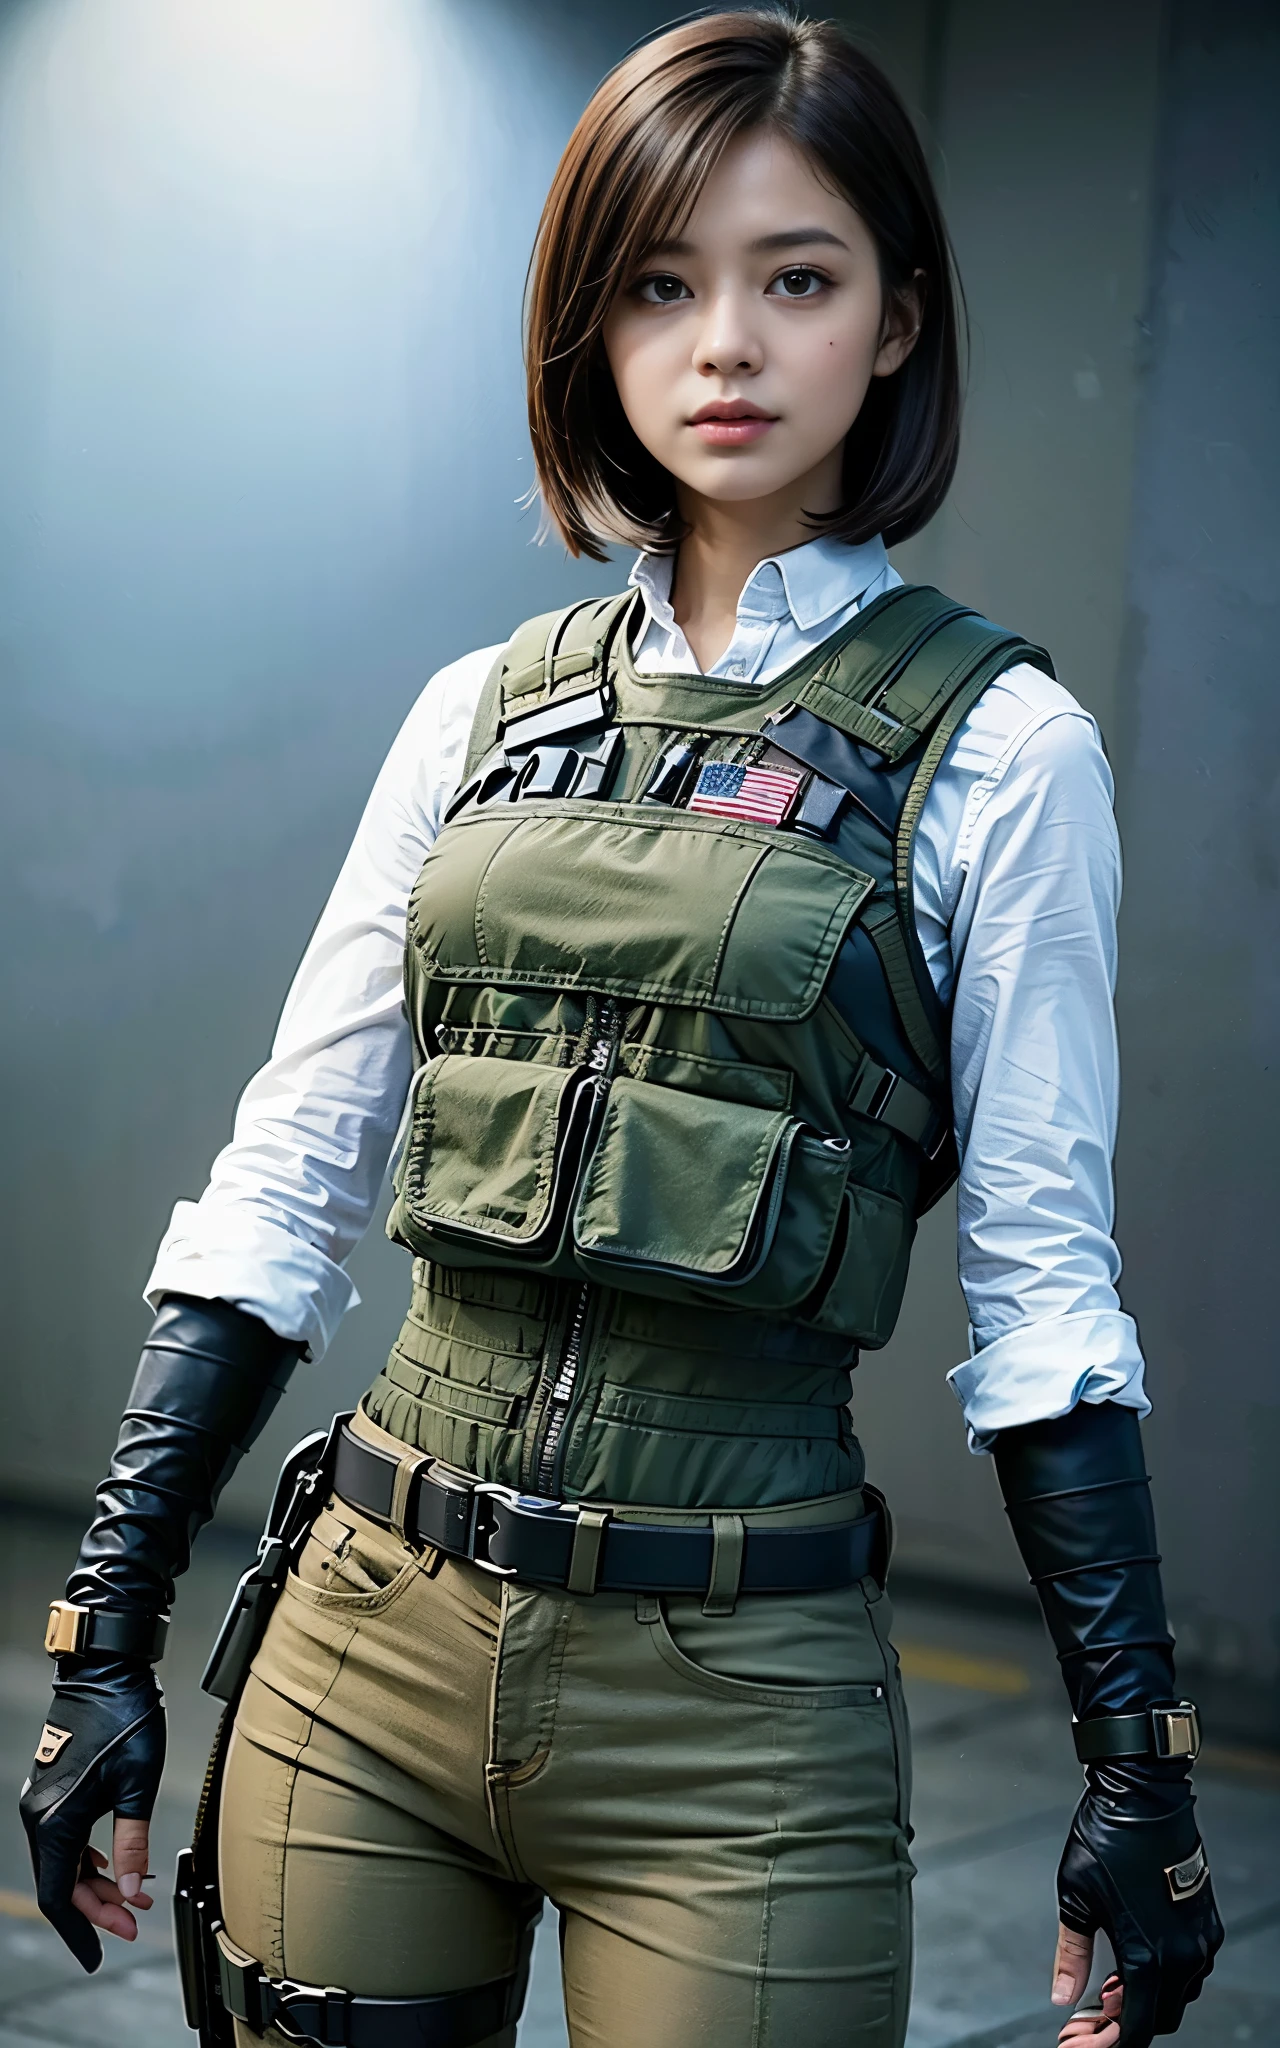 ((Best Quality, 8K, Masterpiece: 1.3)), ((best quality)), photorealistic, photorealism, 1girl aiming with an  assault rifle, Combat pose, Photorealistic, high resolution, looking to the viewer, (Detailed face), short black hair, red rubber suit, tactical vests, military harness, revealed plump thigh, Gun,black gloves, high-tech headset, Fingers are occluded, concrete wall background,